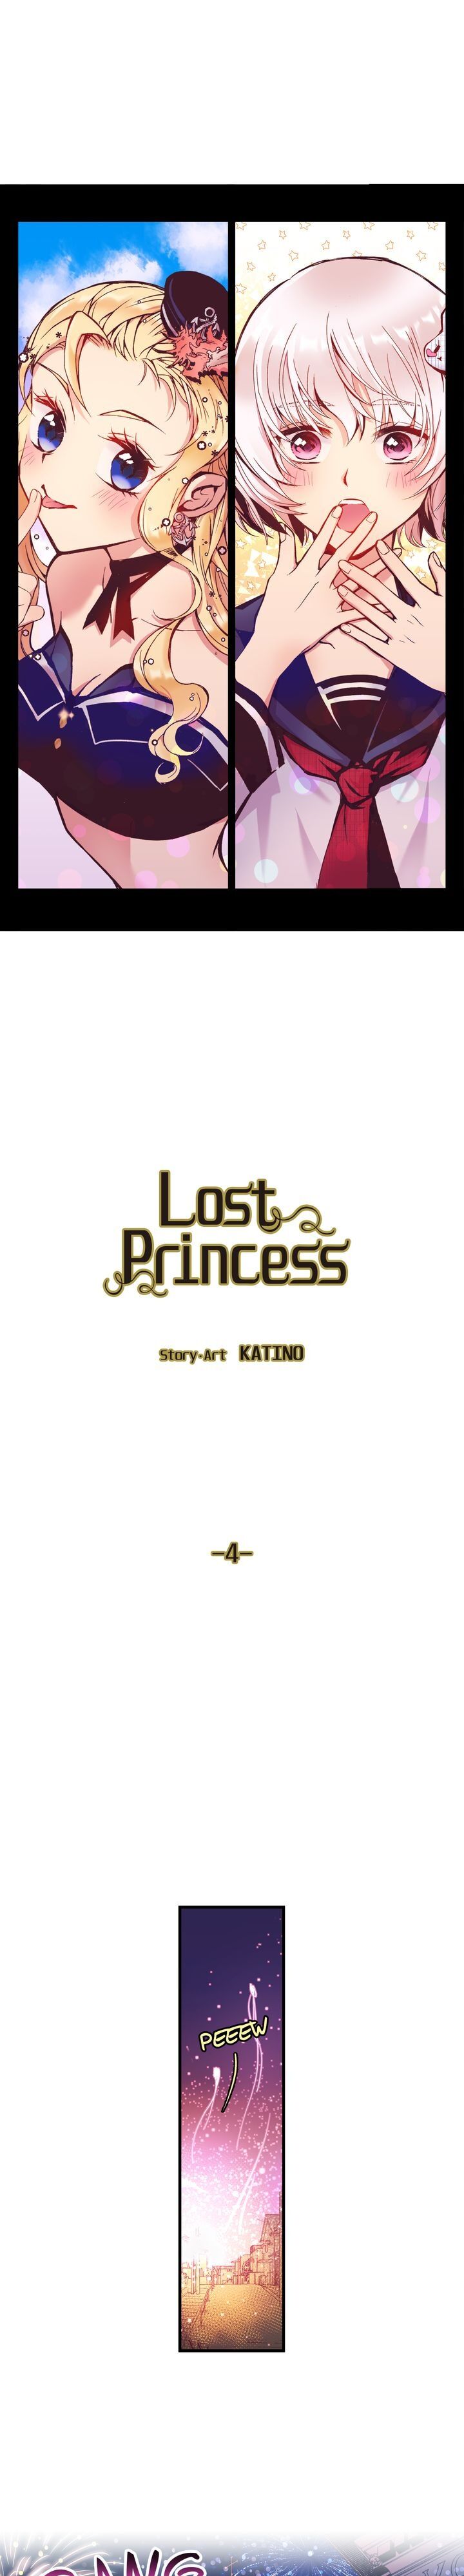 Lost Princess chapter 4